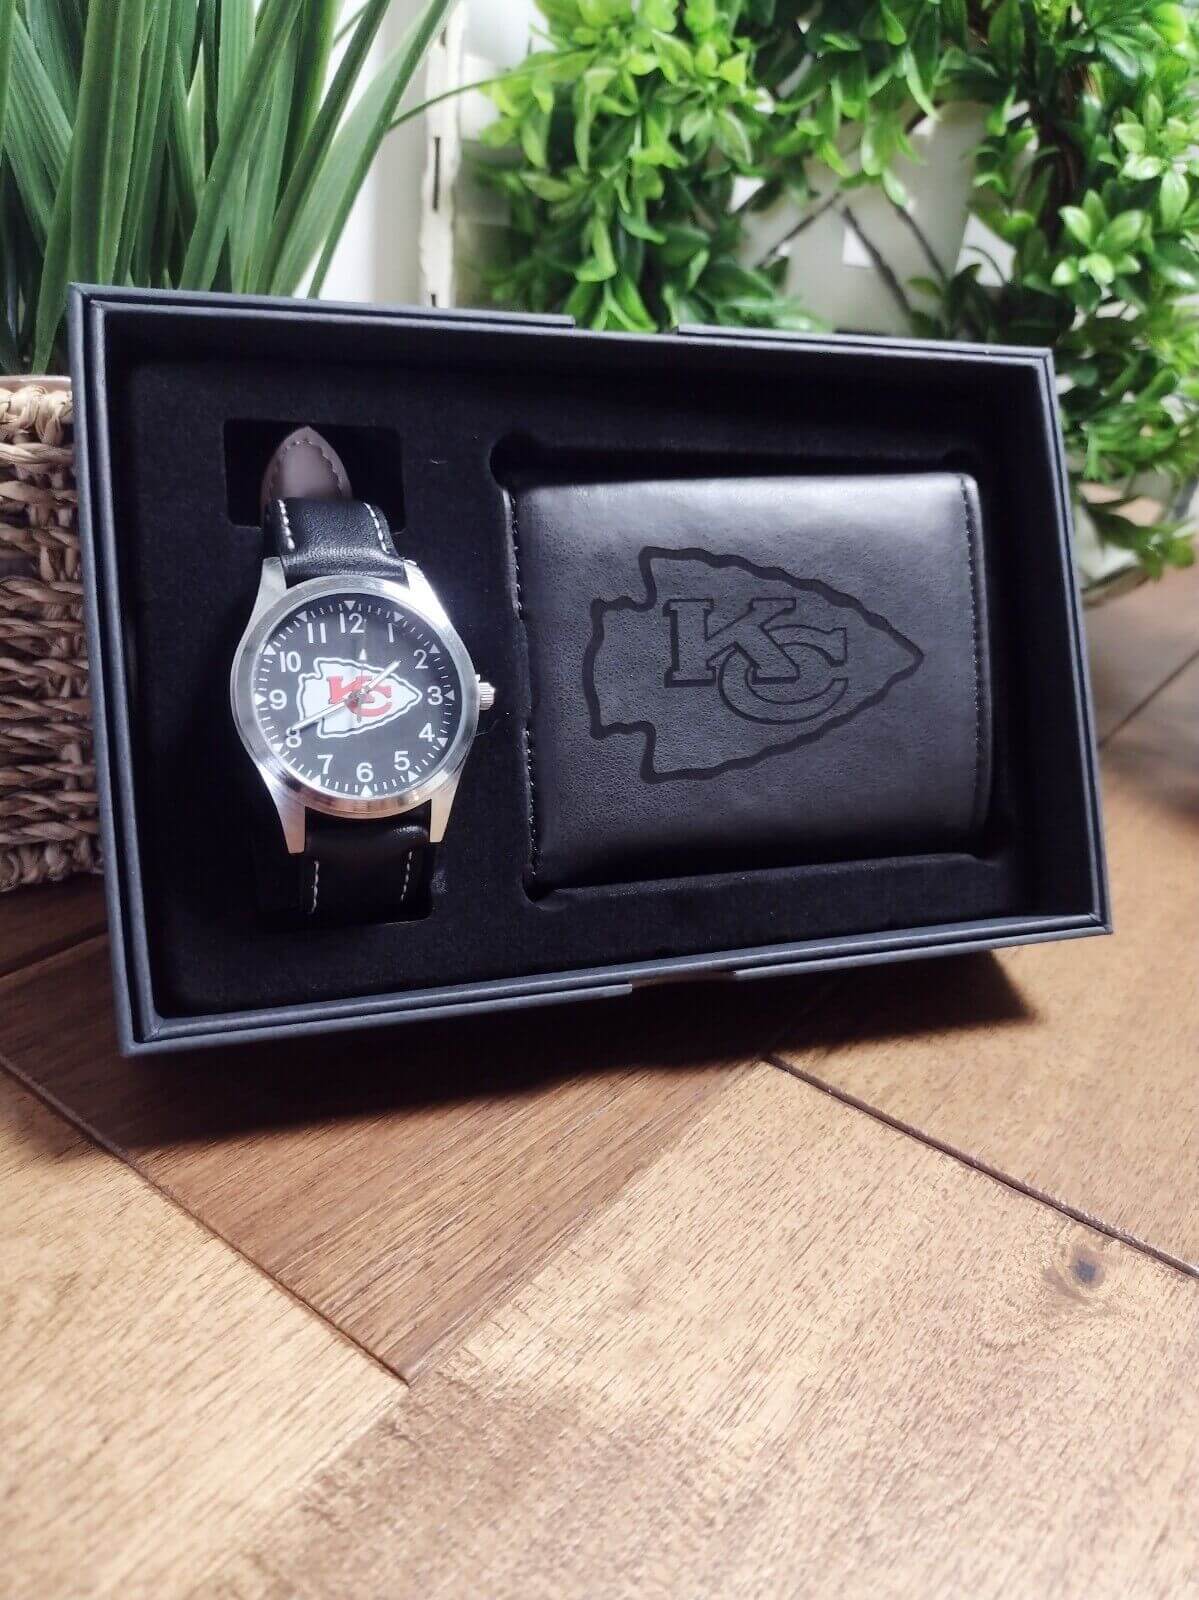 DudeGuys Gifts - Kansas City Chiefs NFL Watch And Wallet Set